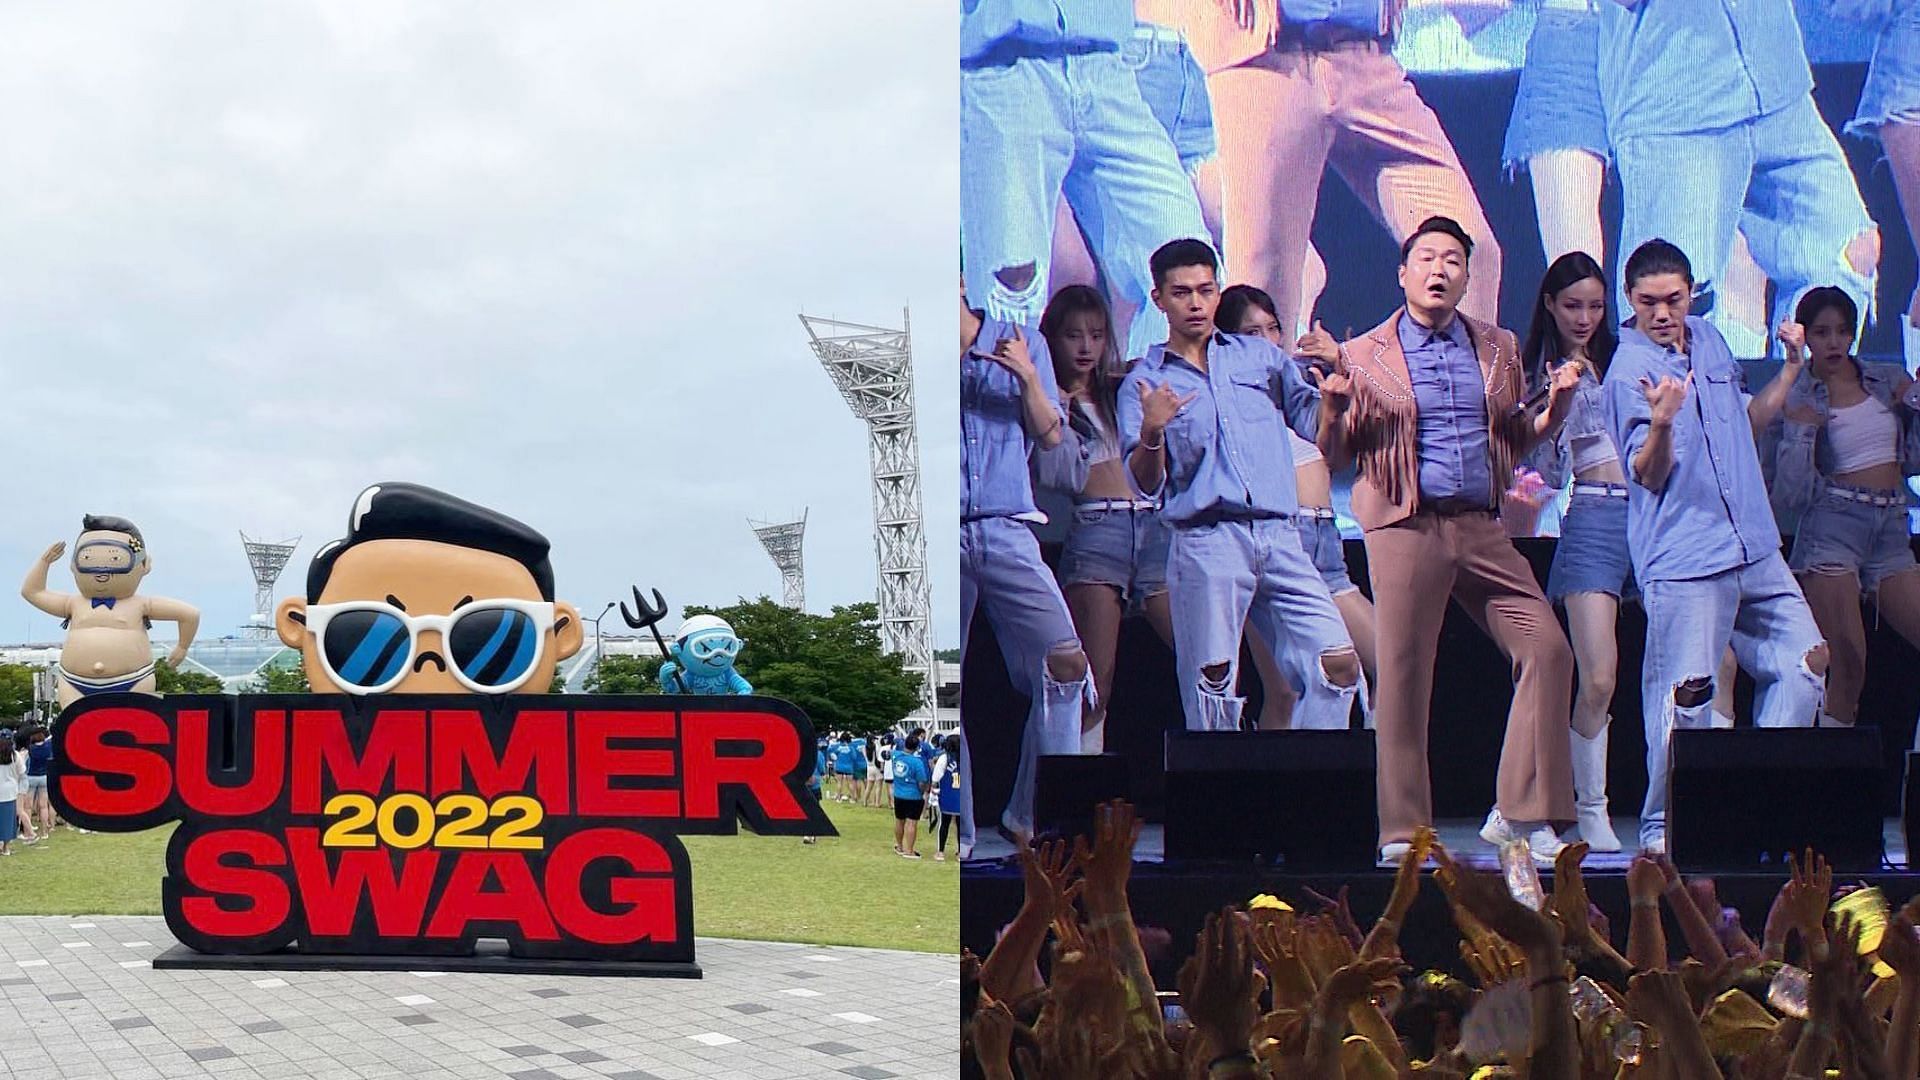 PSY performing at his Summer Swag concert series (Image via Instagram/@42psy42)